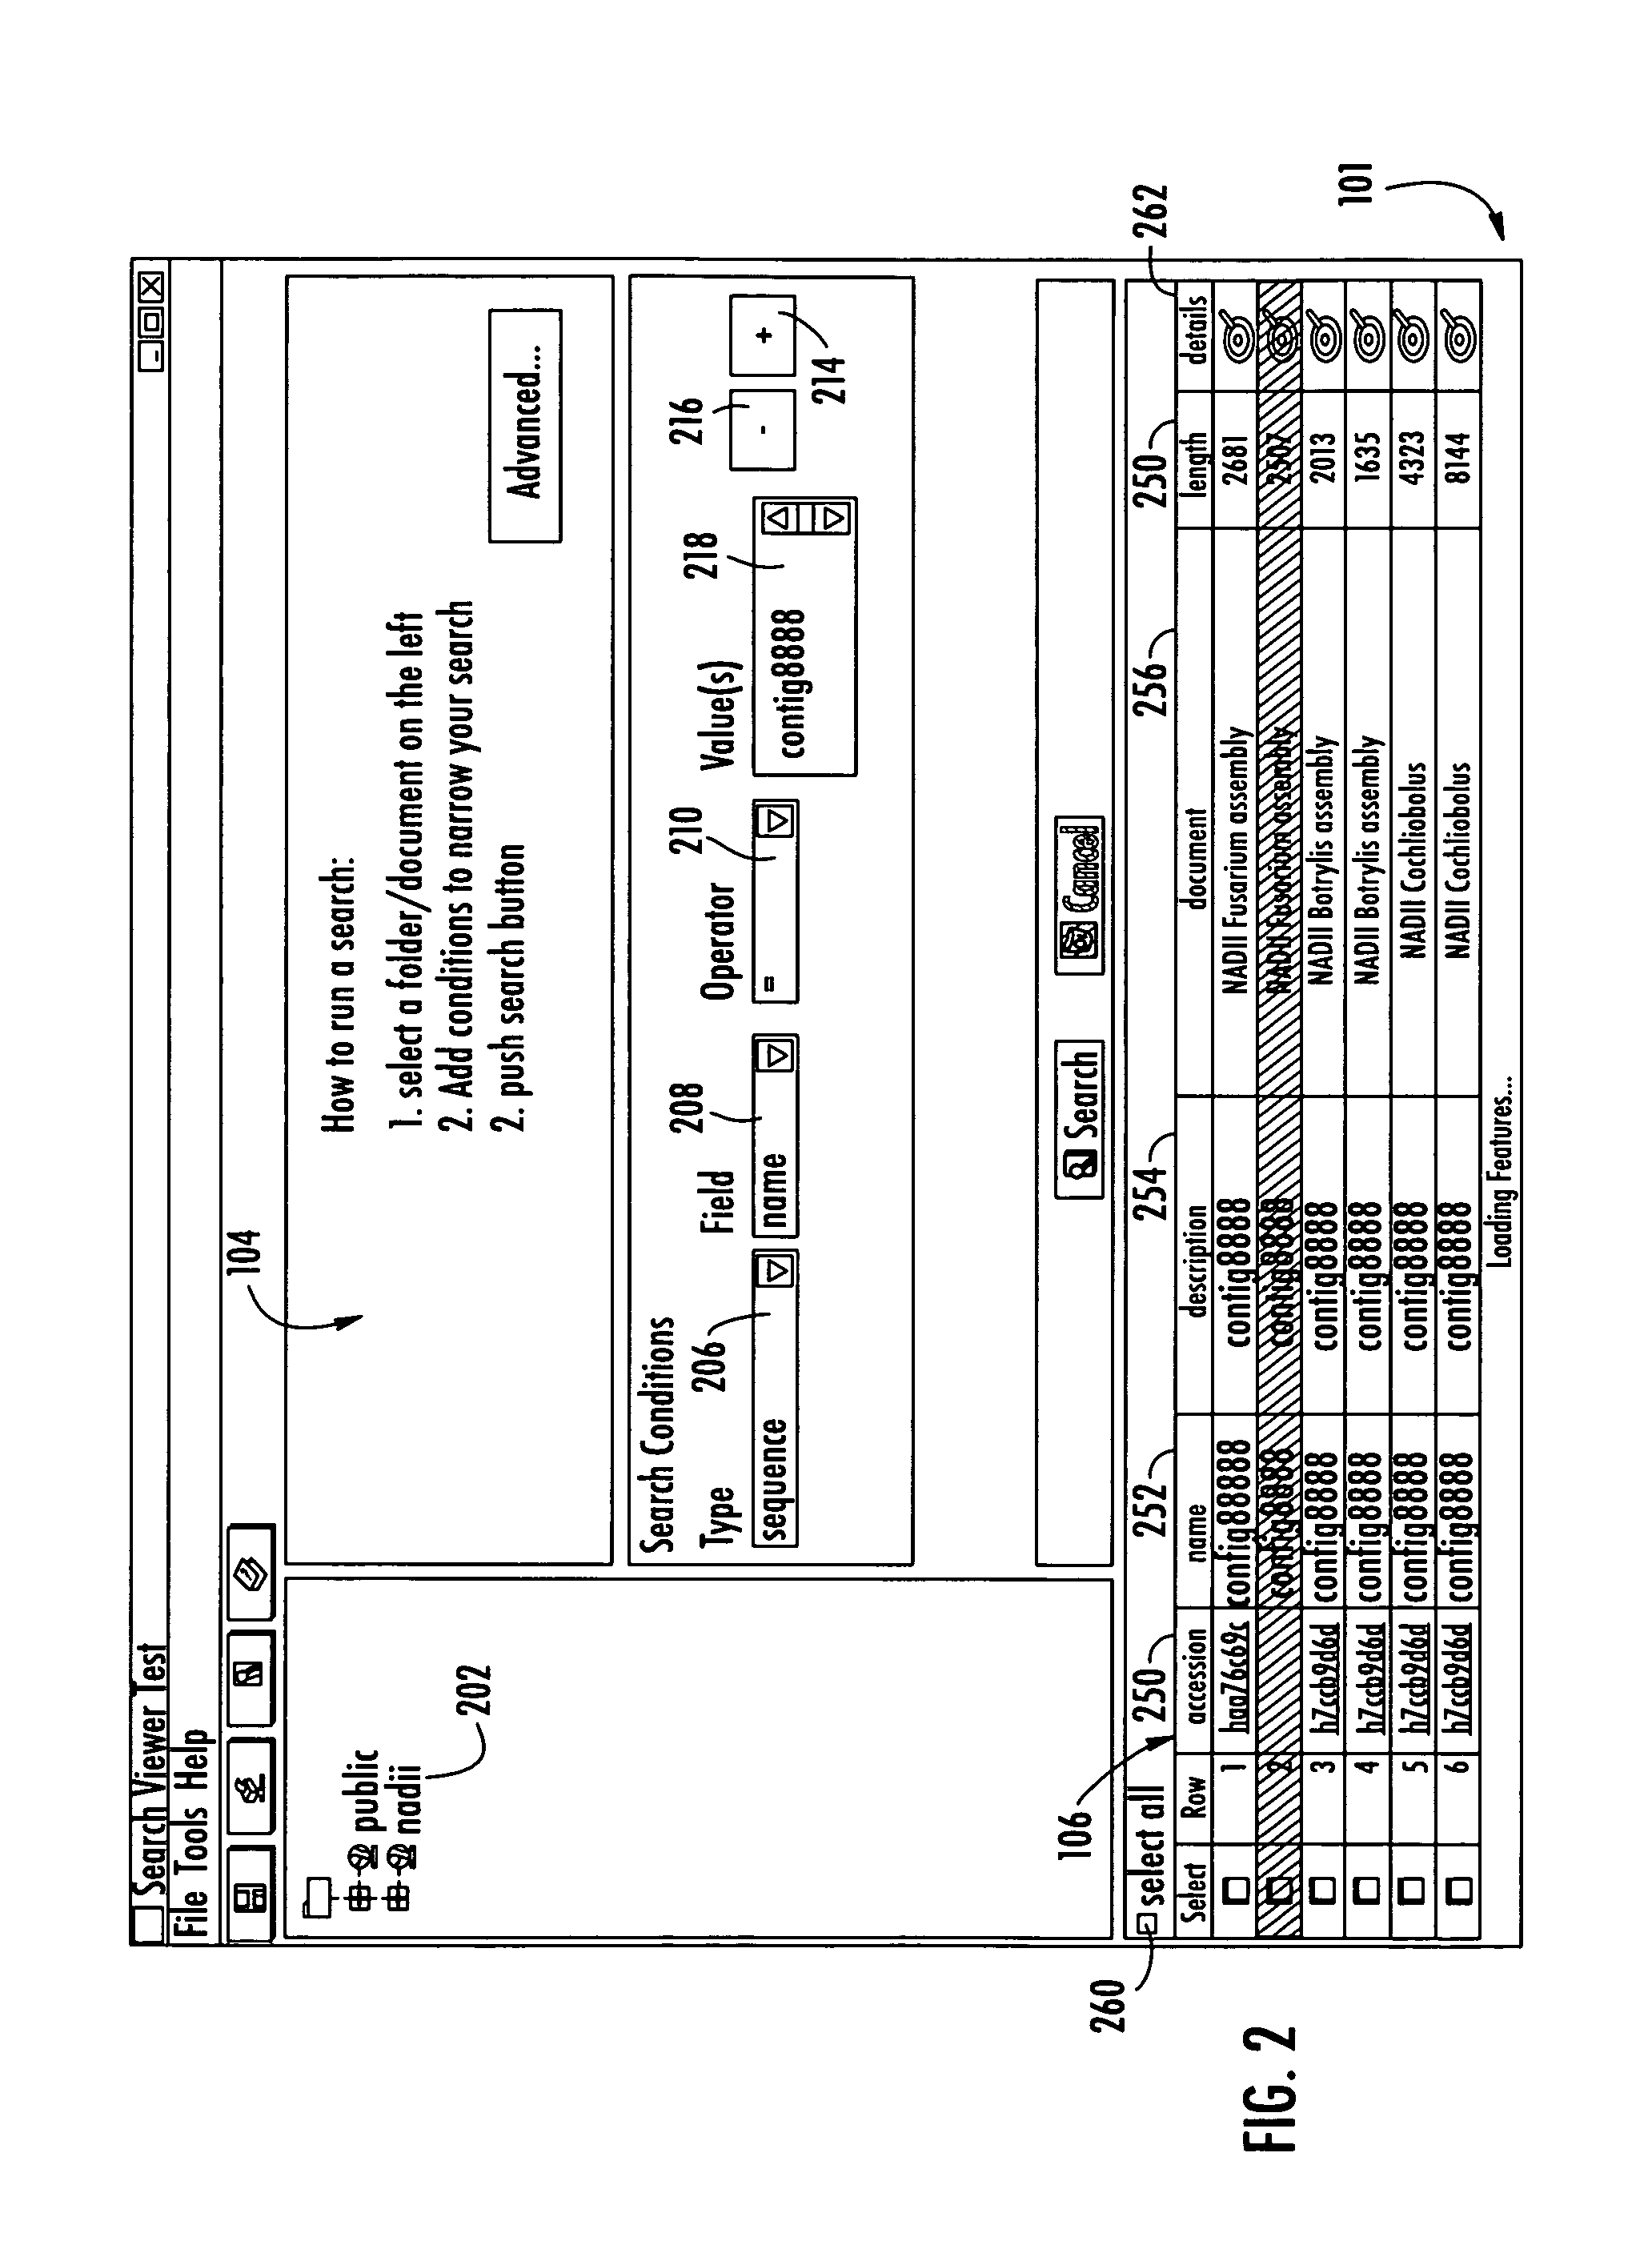 System and method for accessing biological data